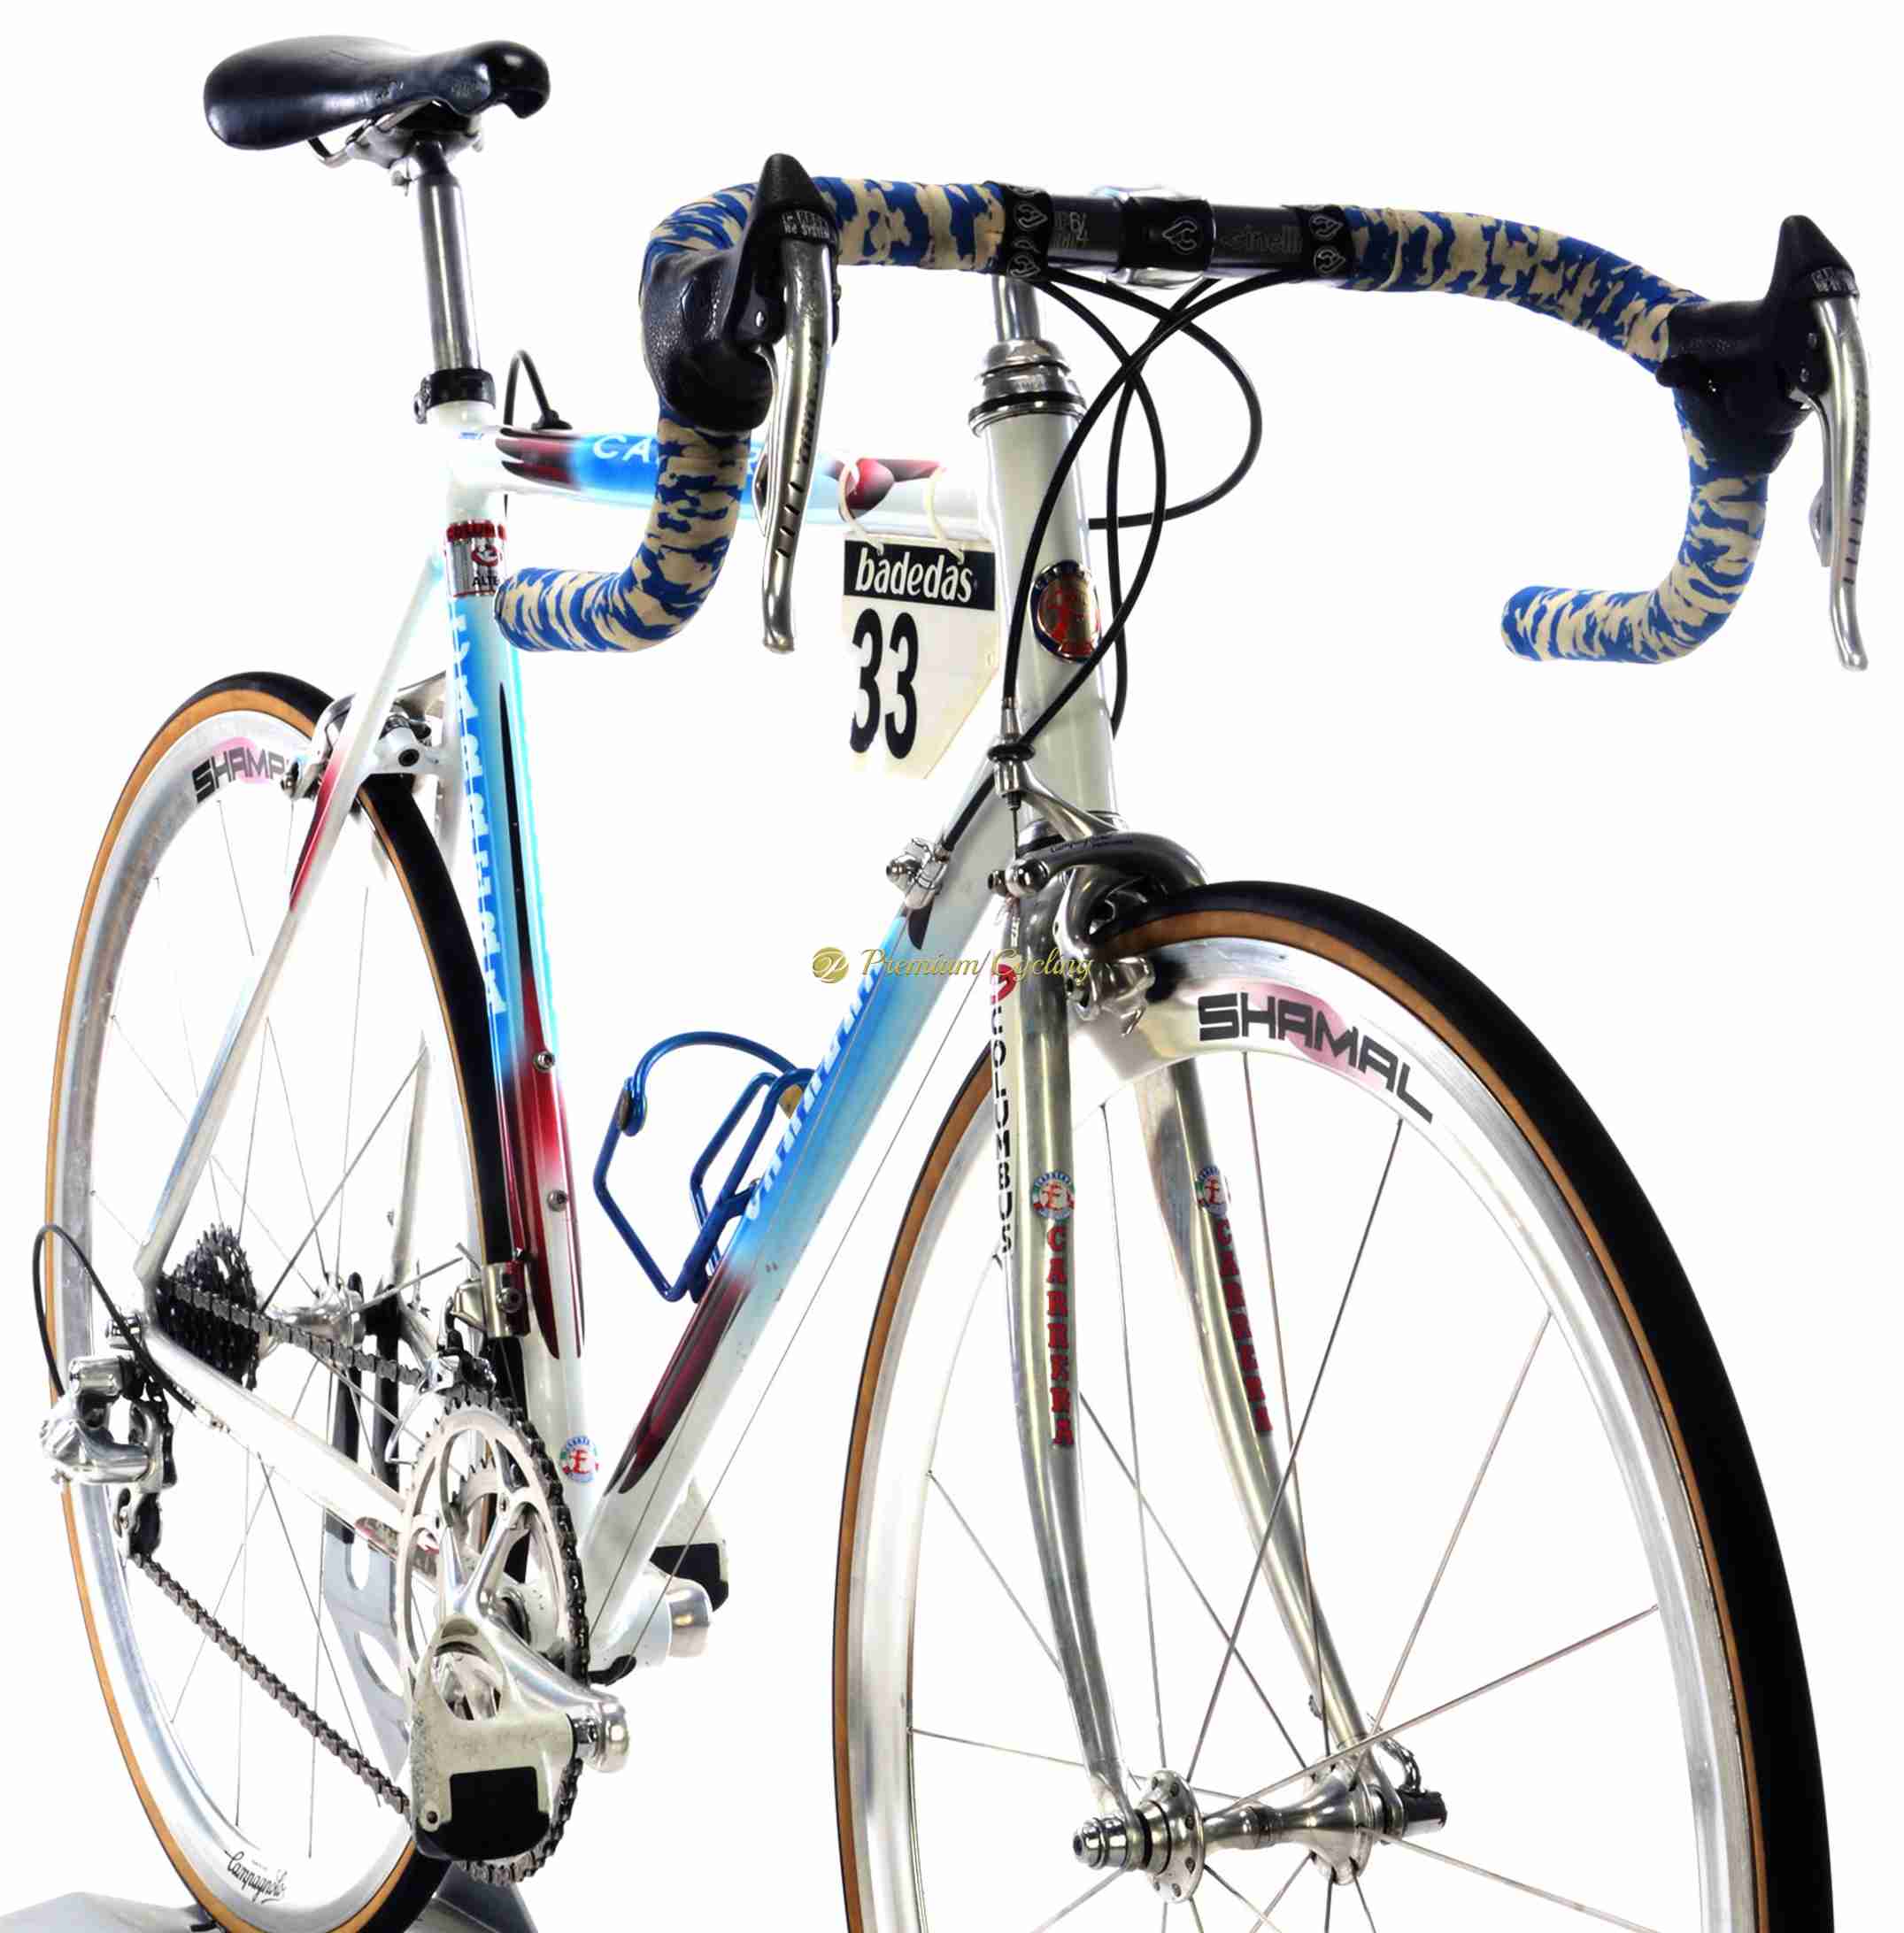 Konvention Mentor Topmøde CARRERA Altec (by Pegoretti) – authentic bike of B.ZBERG, Team Carrera  (1996) – SOLD – Premium Cycling – Website for steel and collectible vintage  bikes, parts and clothing